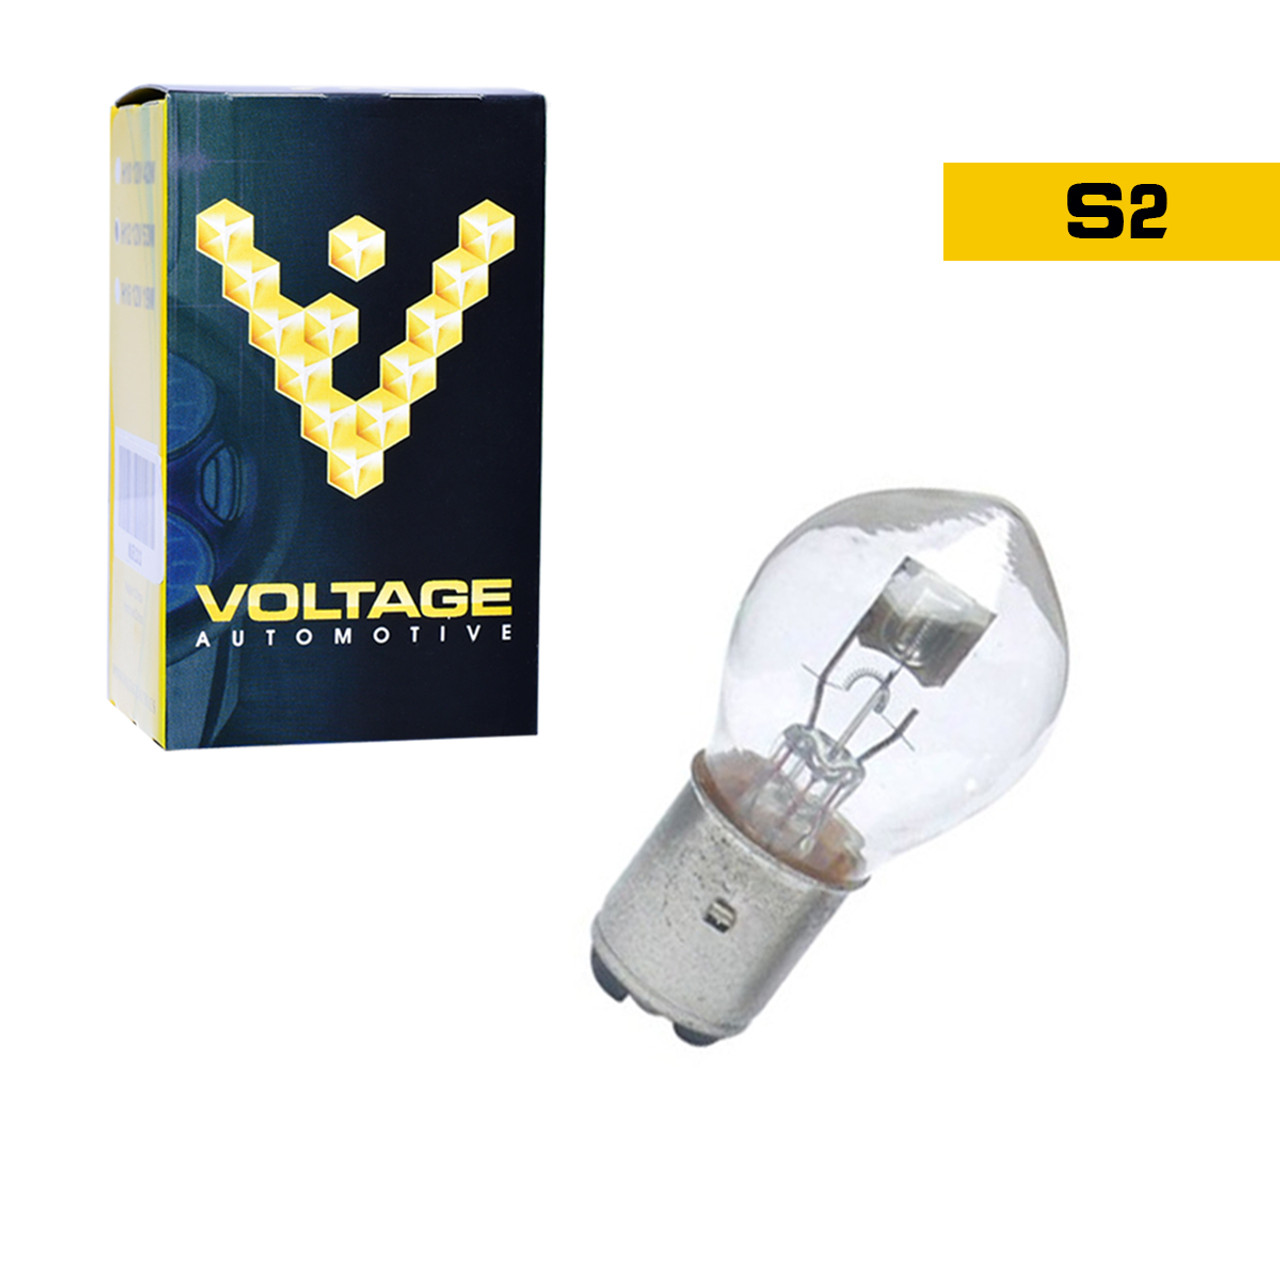 S2 Automotive Headlight Bulb For Motorcycle Scooters Snowmobiles